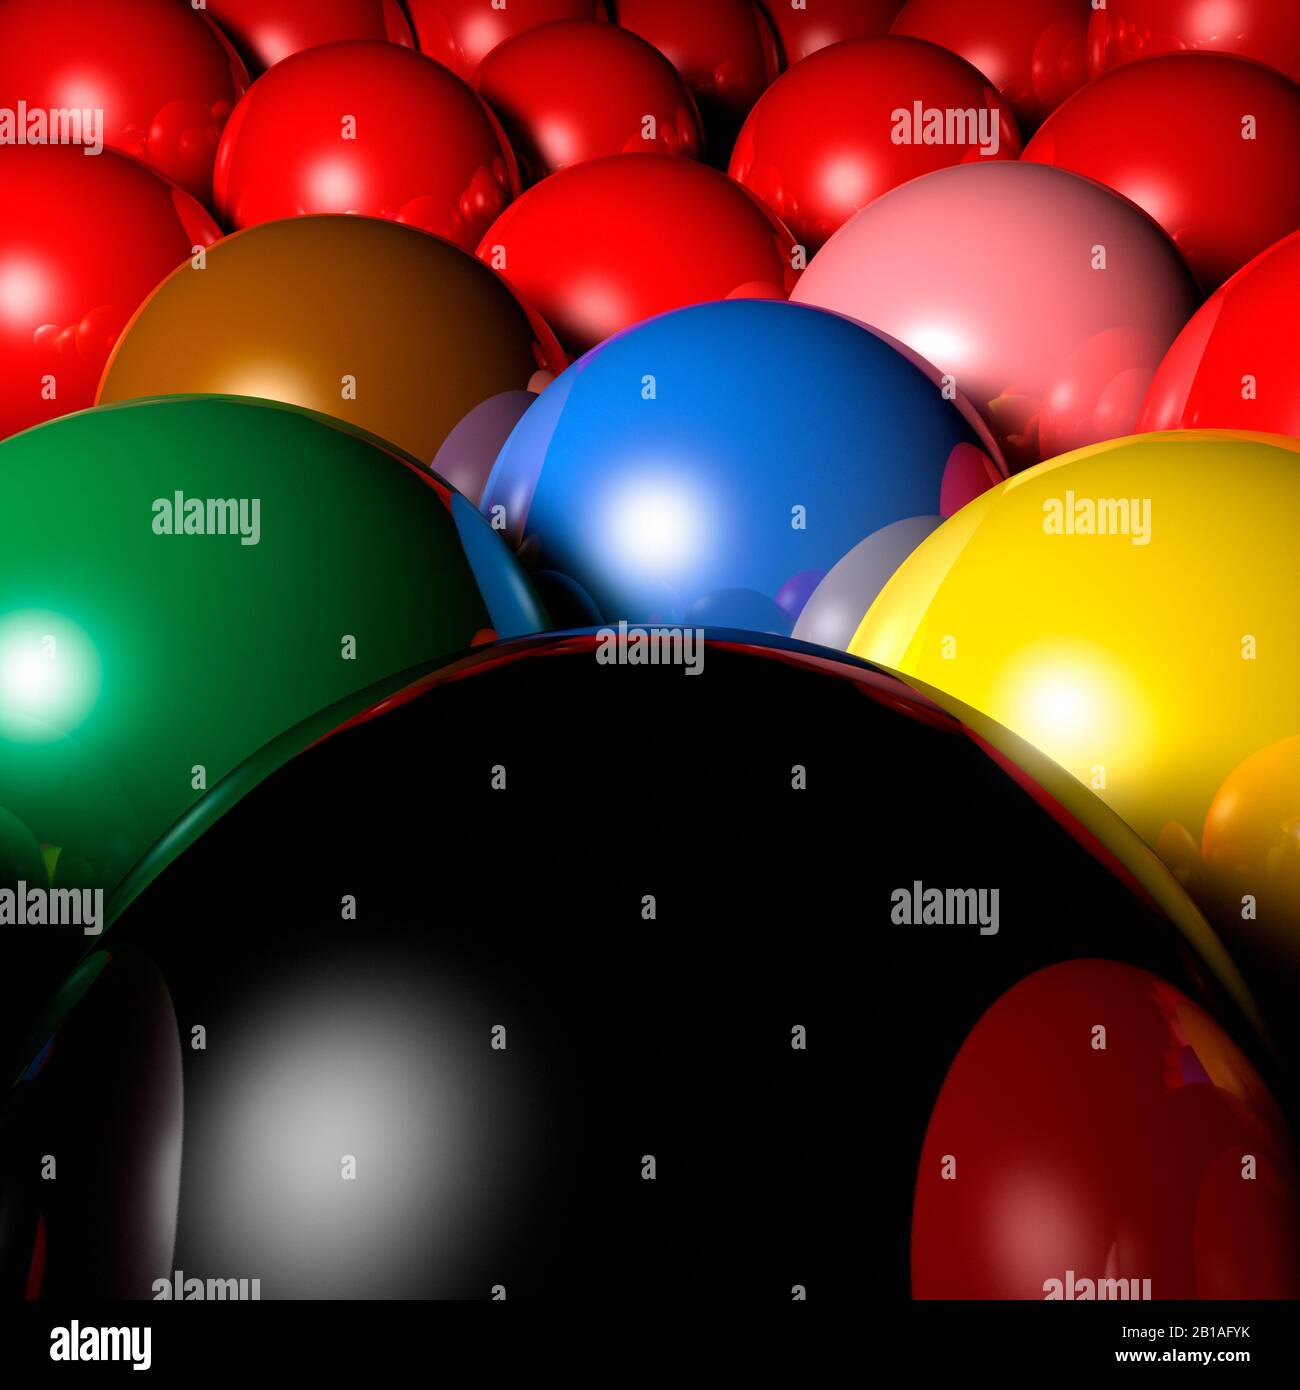 Snooker ball. Balls close up stretching into the distance. Billiards. New and shiny. Stock Photo